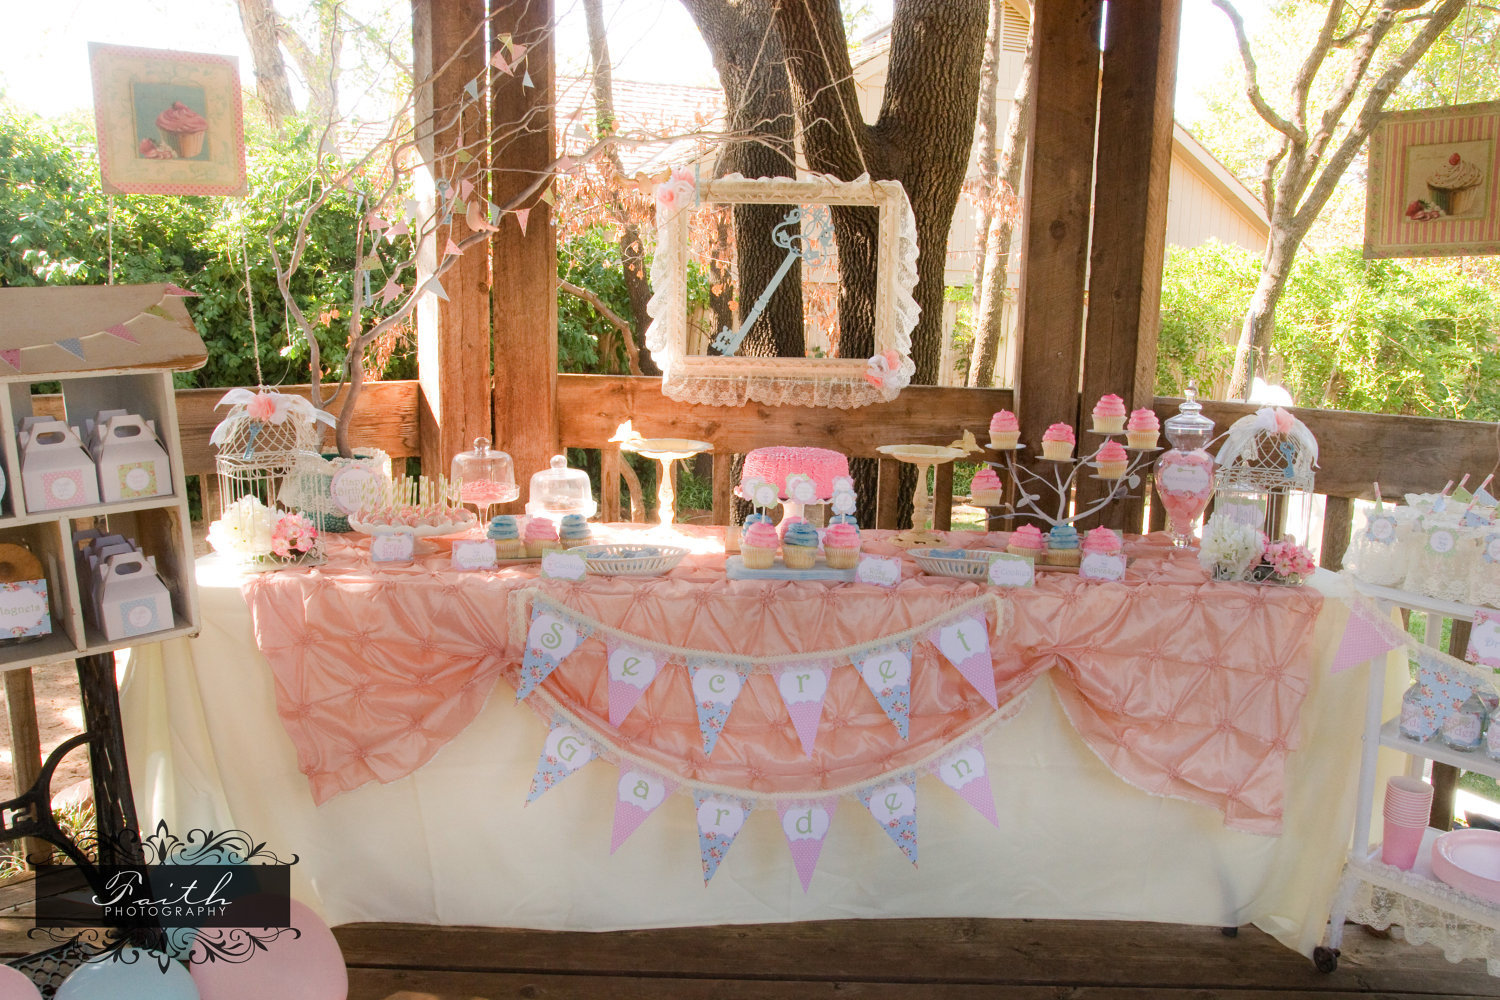 Shabby Chic Tea Party Ideas
 Tea Party Girls Birthday Party Shabby Chic by